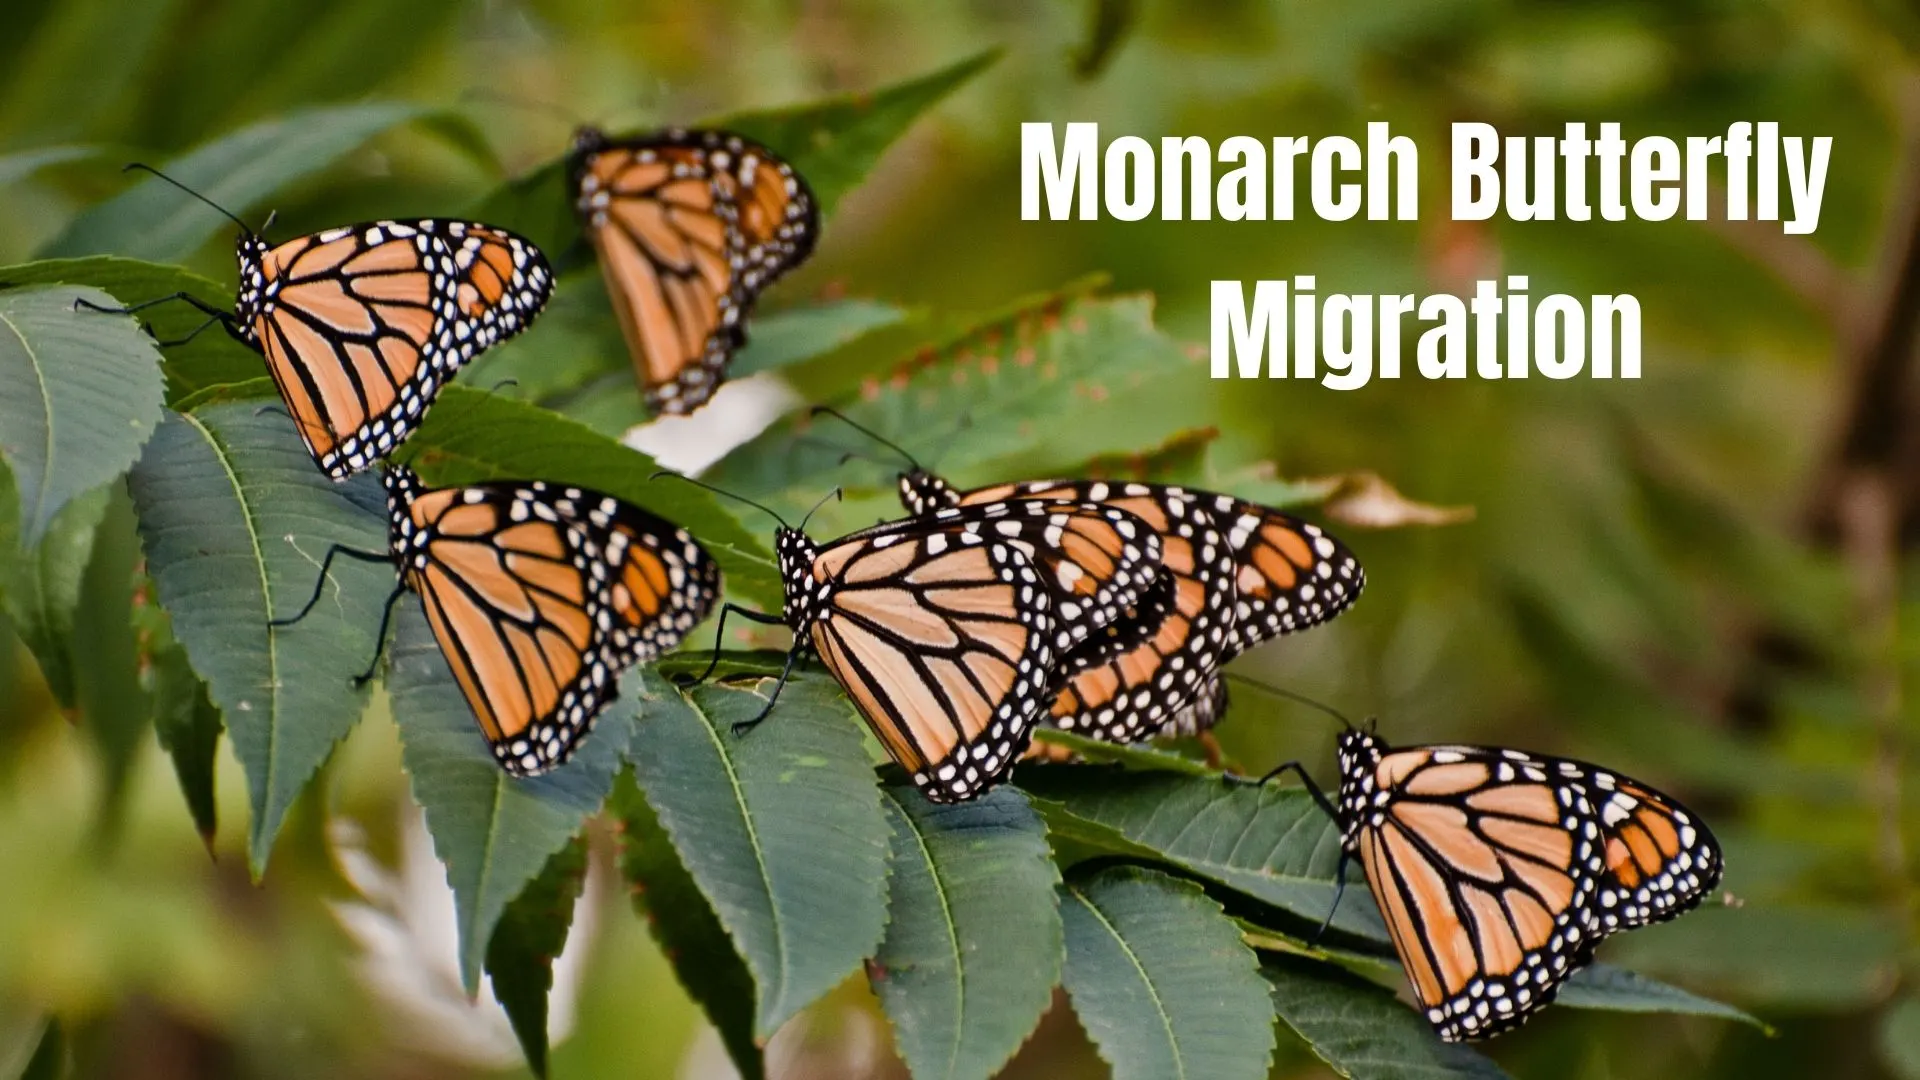 A picture of monarch butterflies on leaves with the text "Monarch Butterfly Migration" in white.